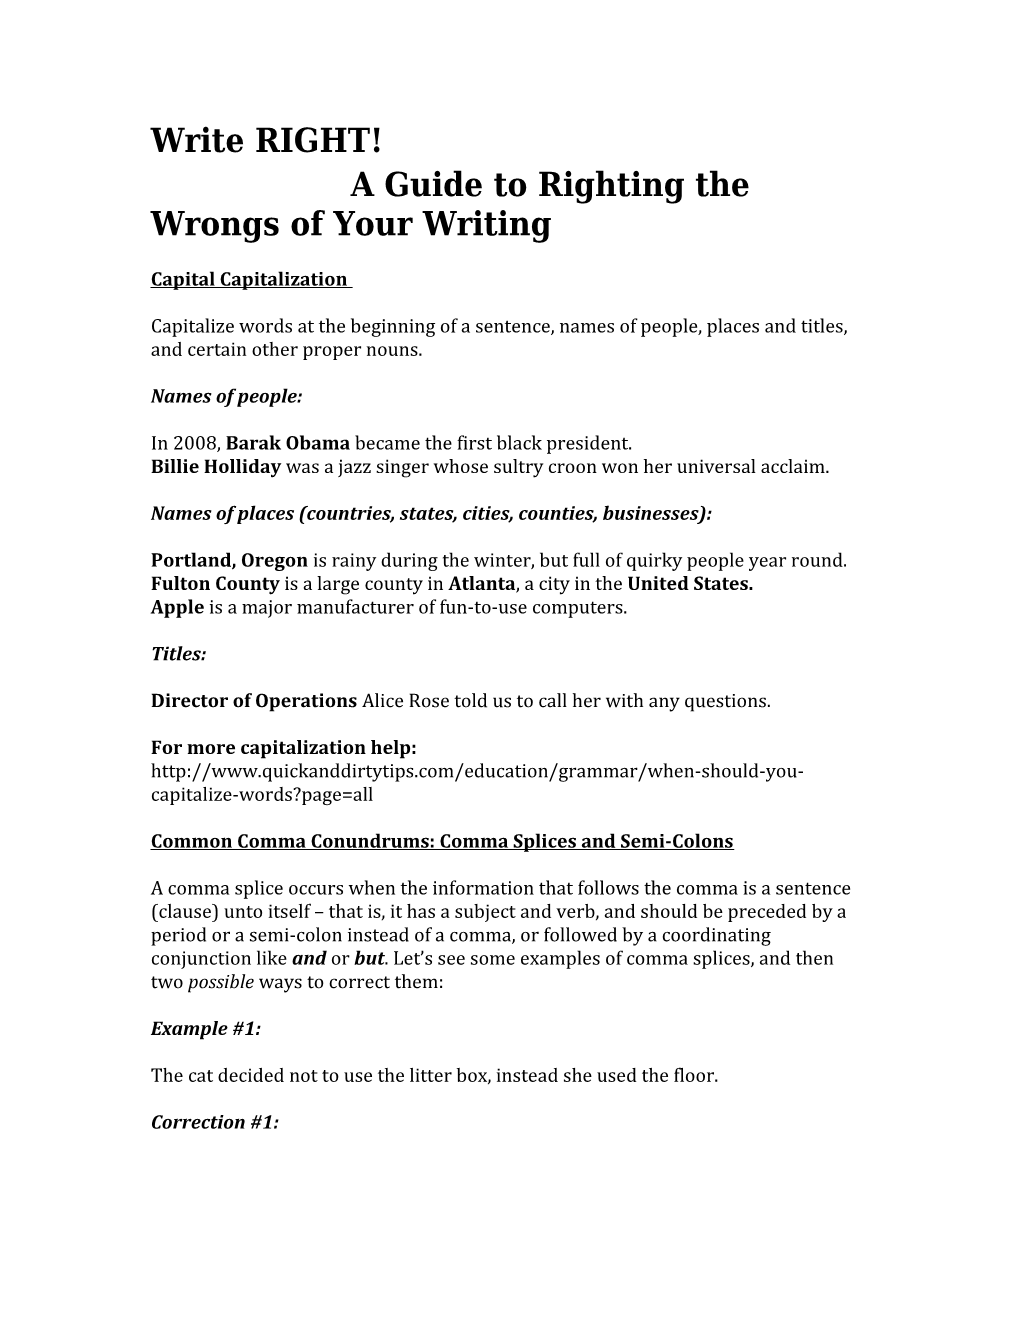 A Guide to Righting the Wrongs of Your Writing